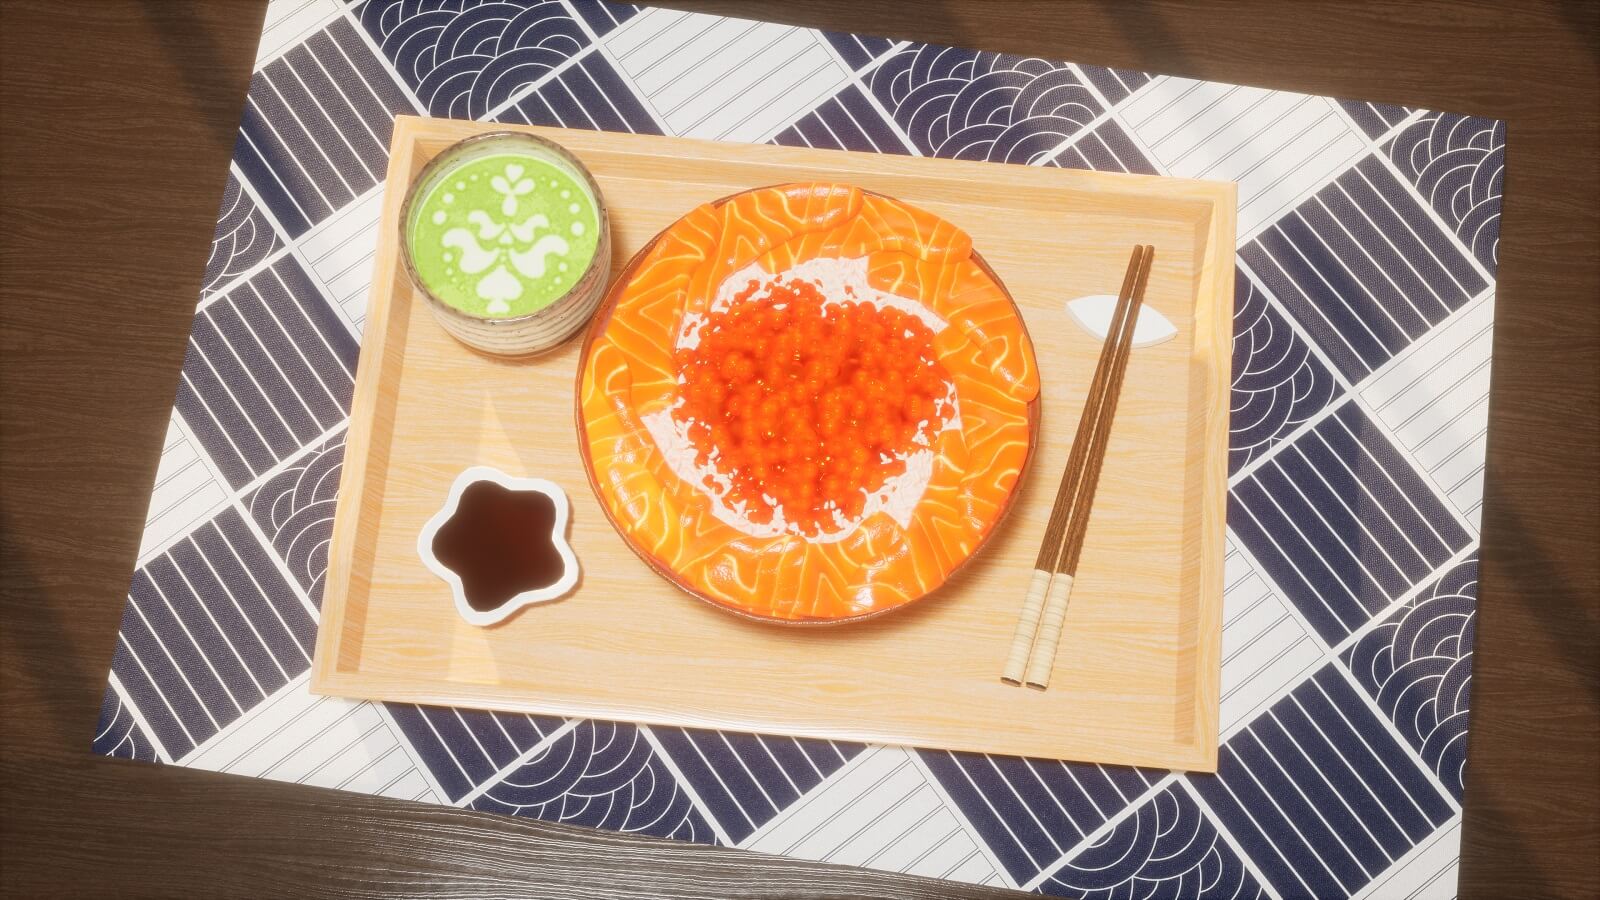 Overhead view of a meal on a tray, featuring salmon roe and sashimi